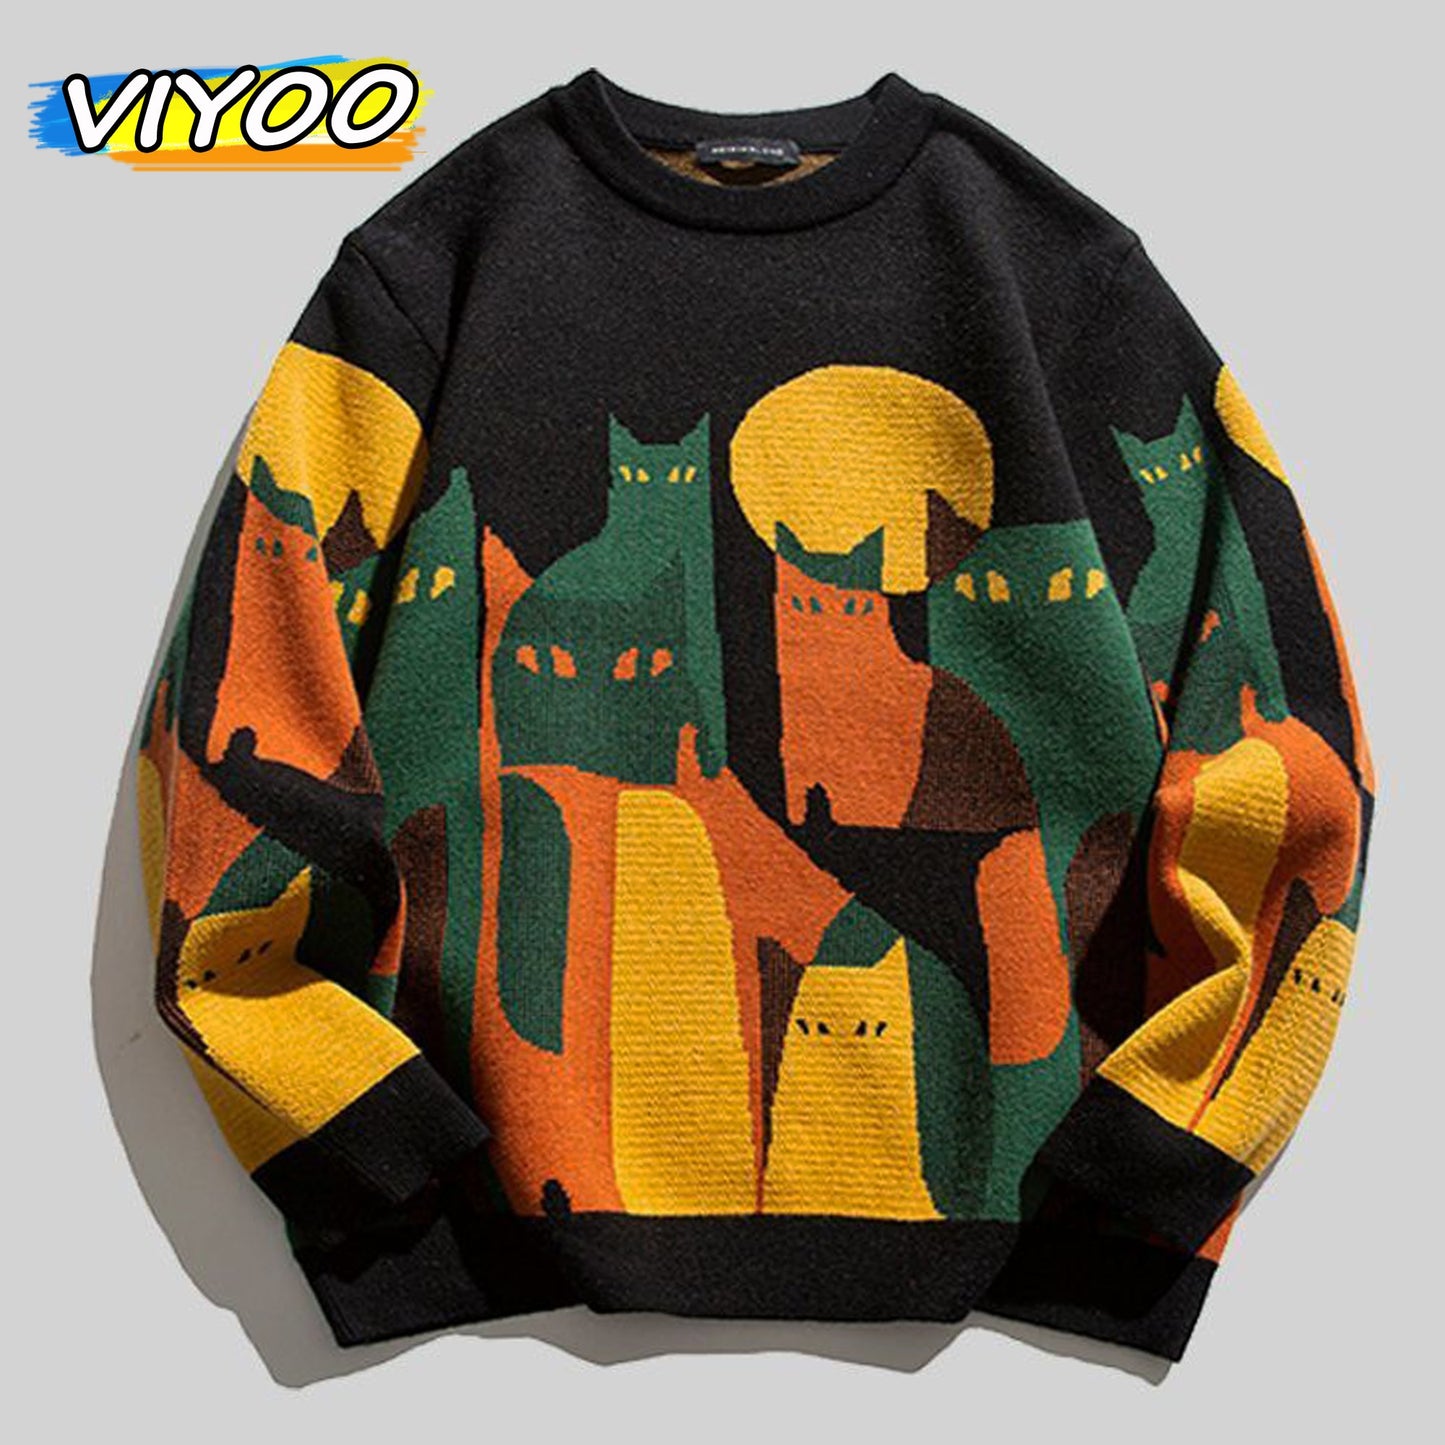 Mens Knitted Sweater Sweatshirts Clothes Pullover Winter Jumper Knit Fleece Sweater For Men - MSS2282